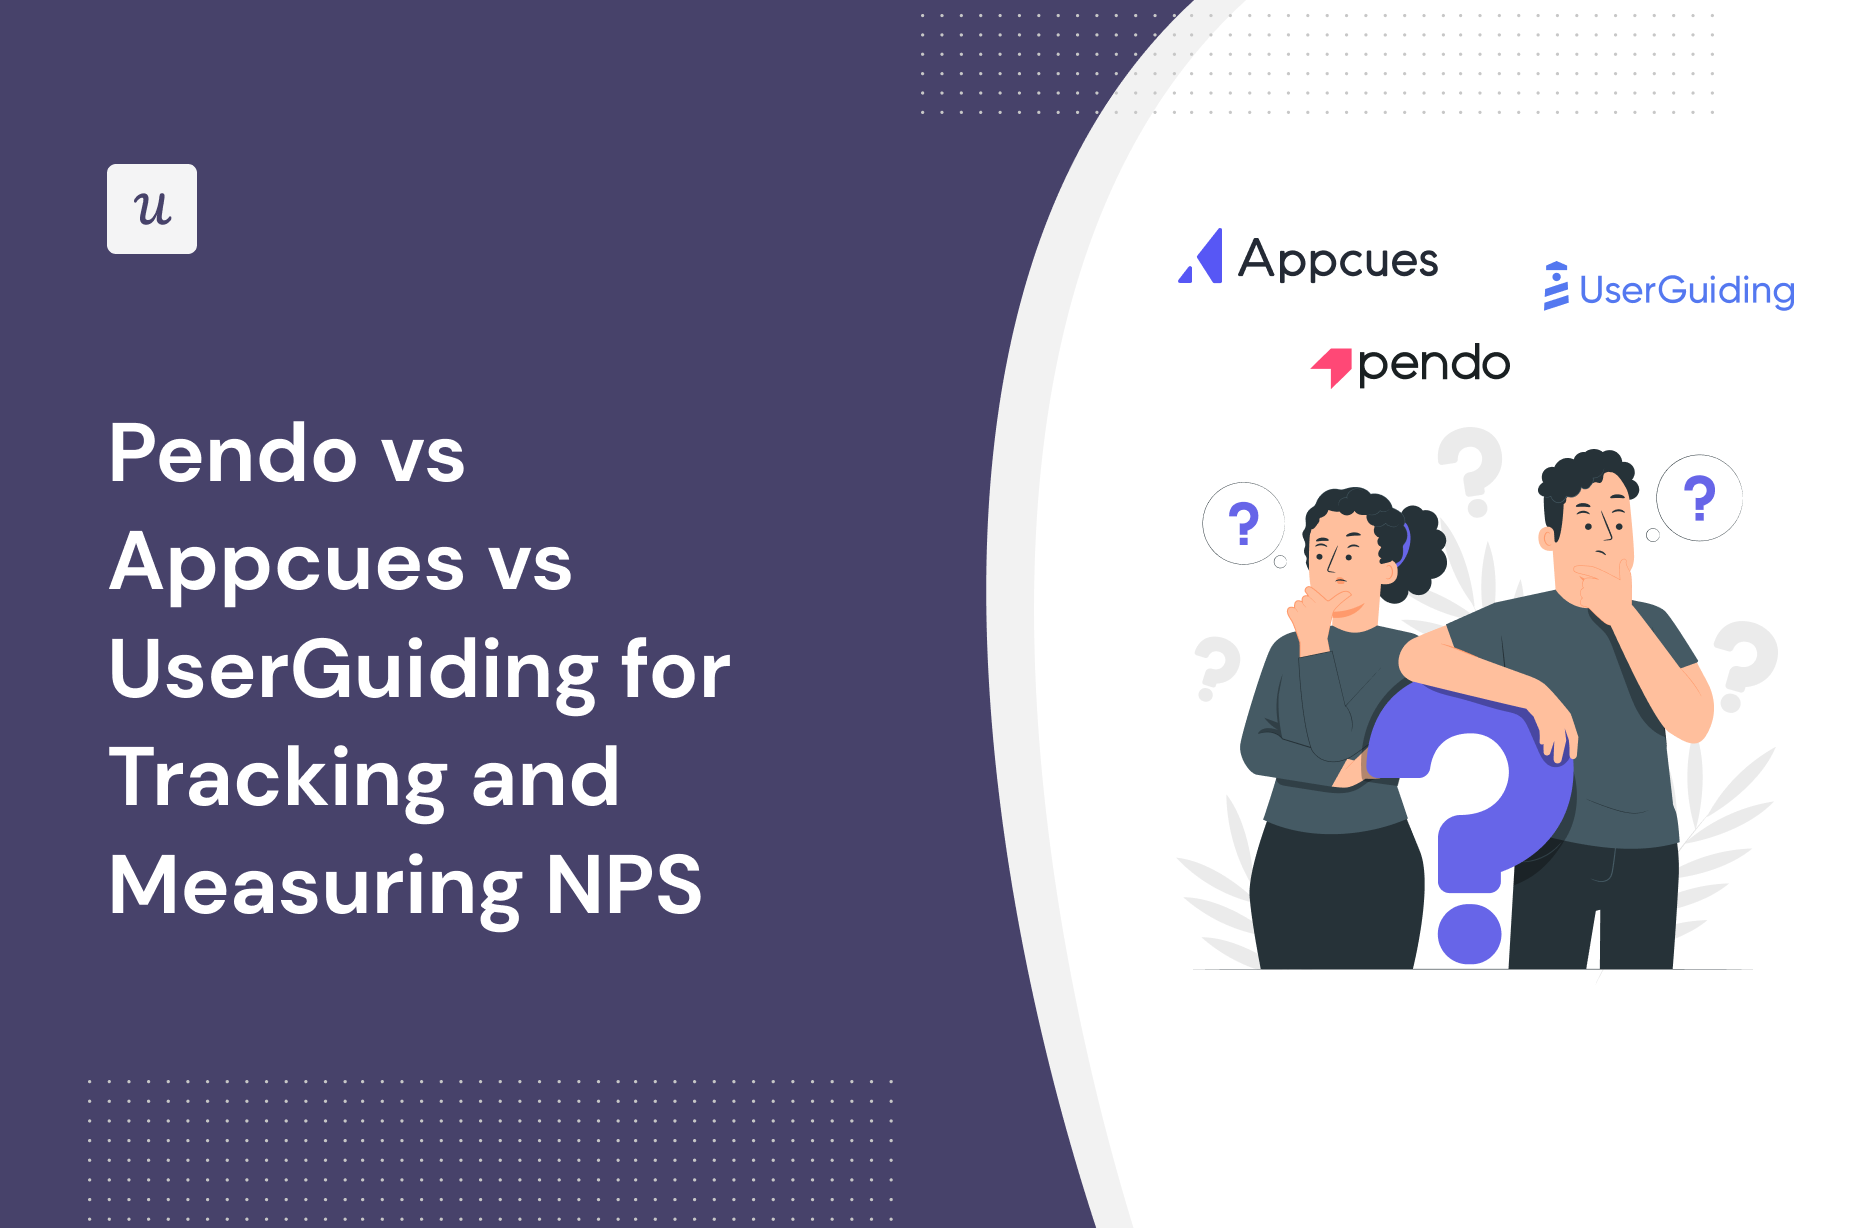 Pendo vs Appcues vs UserGuiding for Tracking and measuring NPS